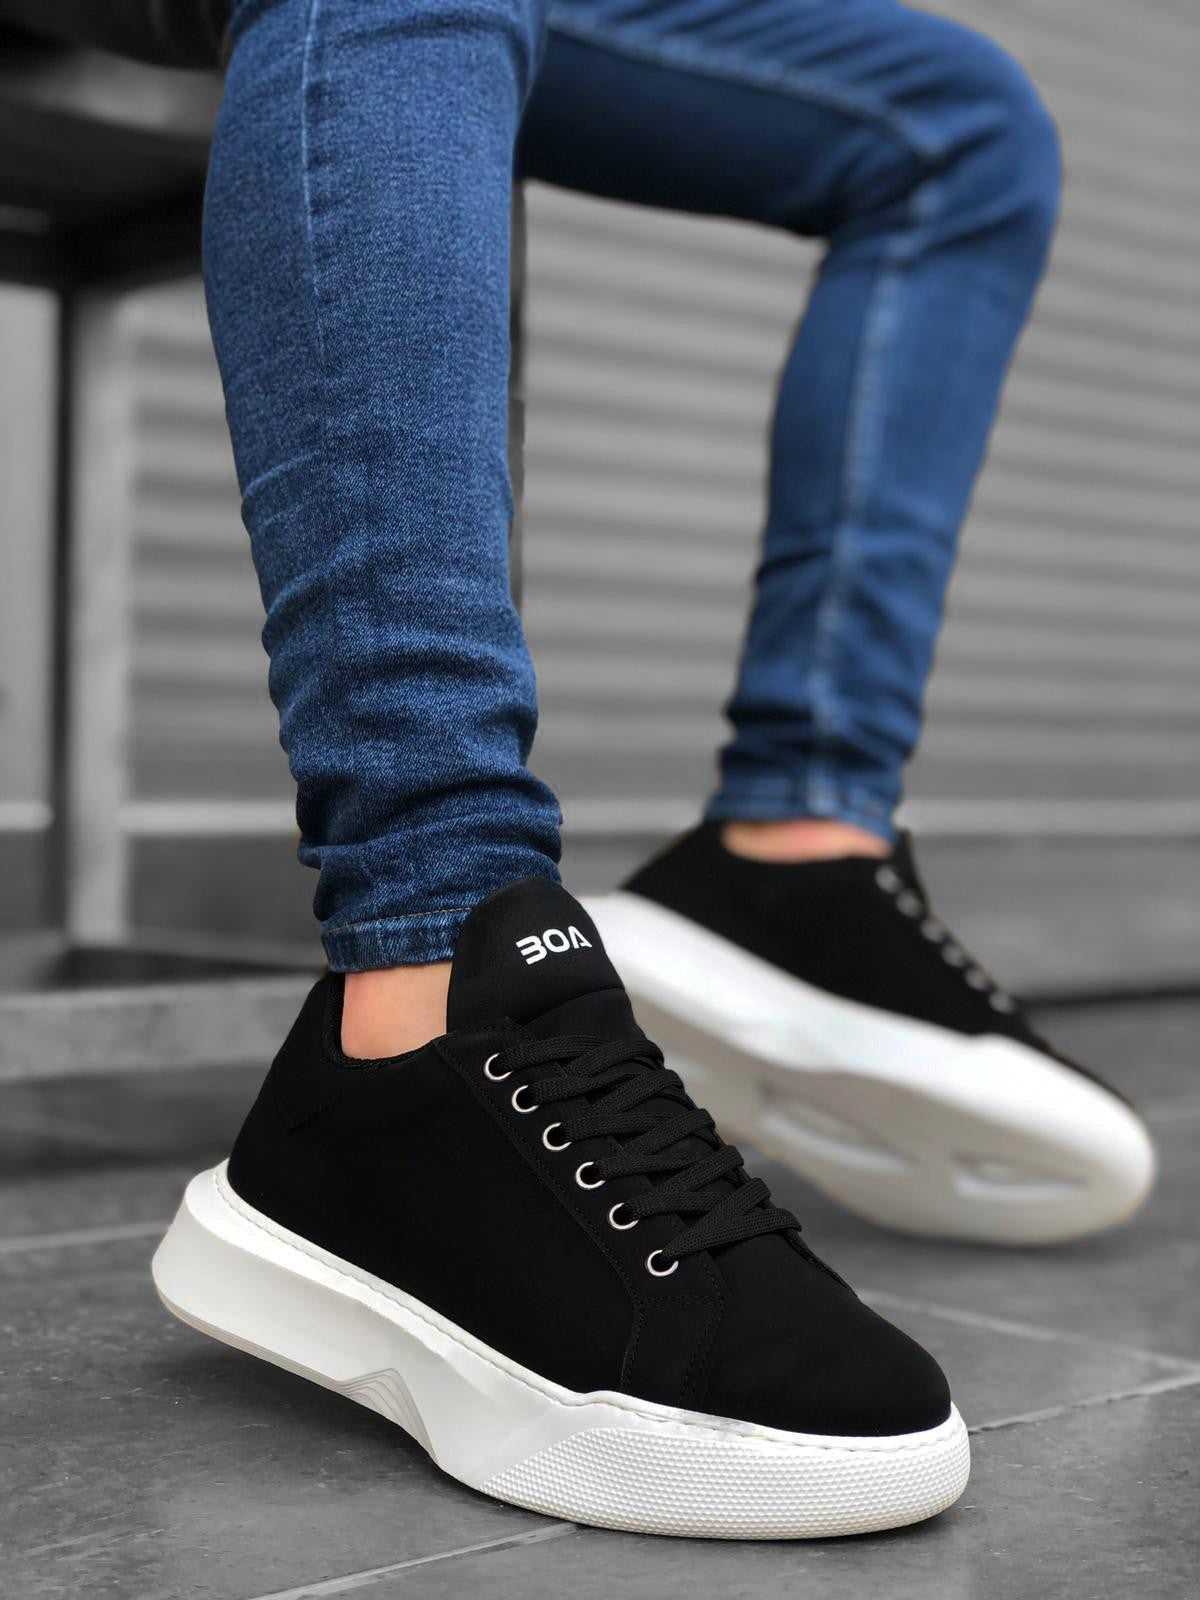 BA0161 Lace-up Men's High Sole Black White Sneakers - STREETMODE™